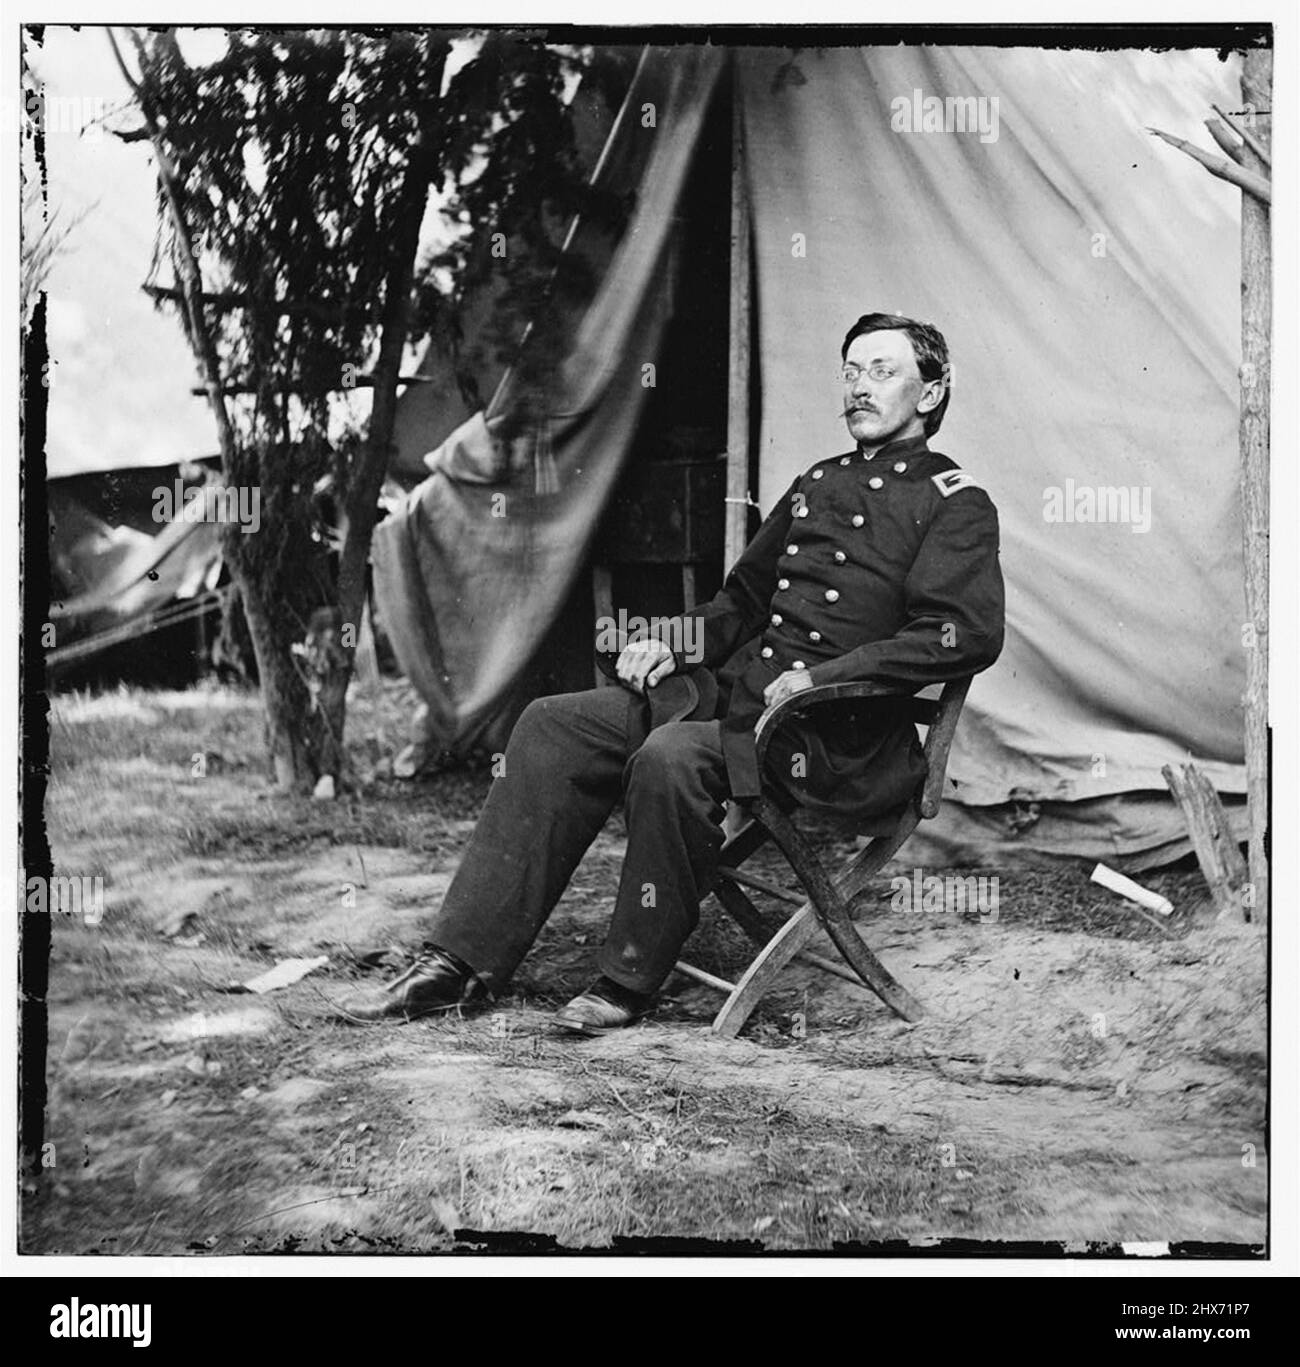 Vintage photo from the American Civil War 1860s Stock Photo